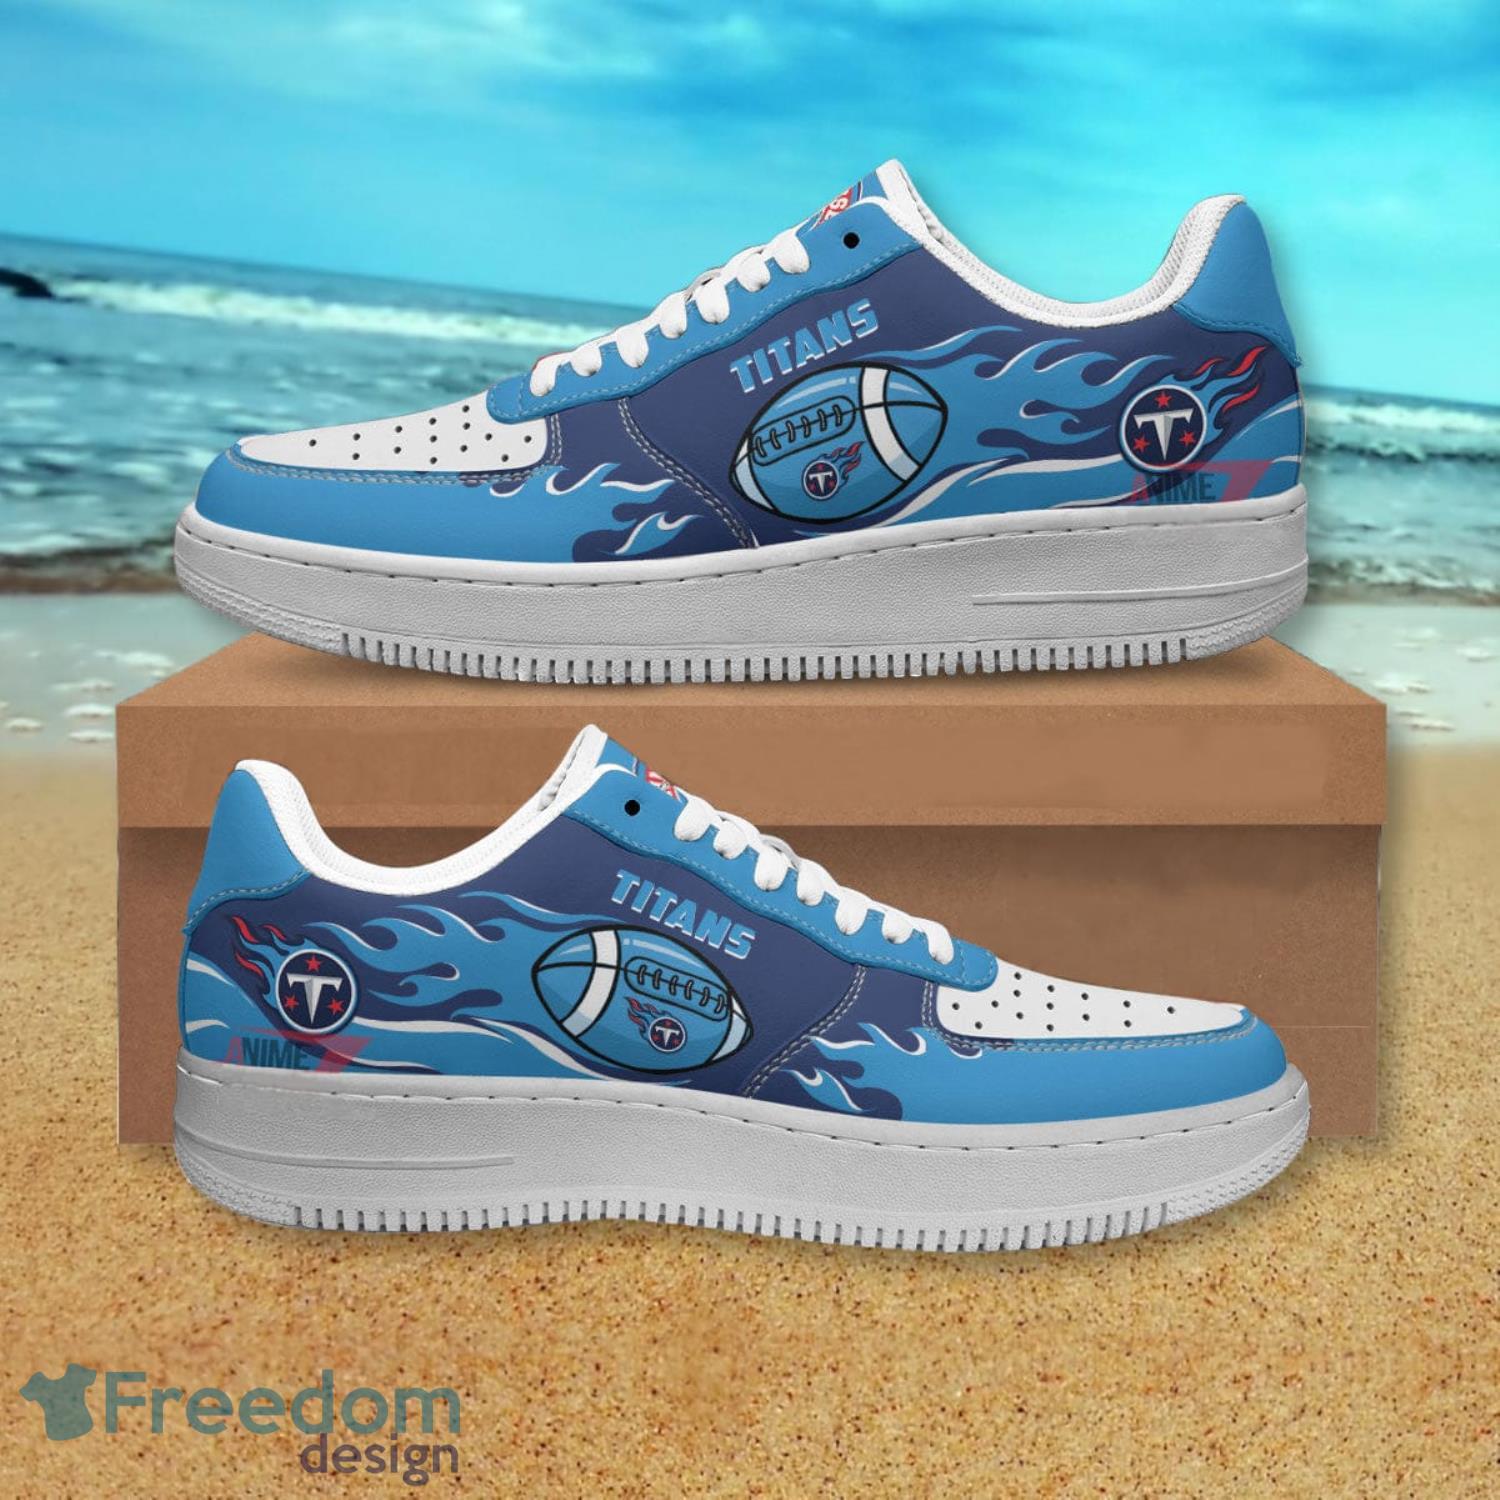 Tennessee Titans Team NFL Air Force Shoes Gift For Fans Product Photo 1